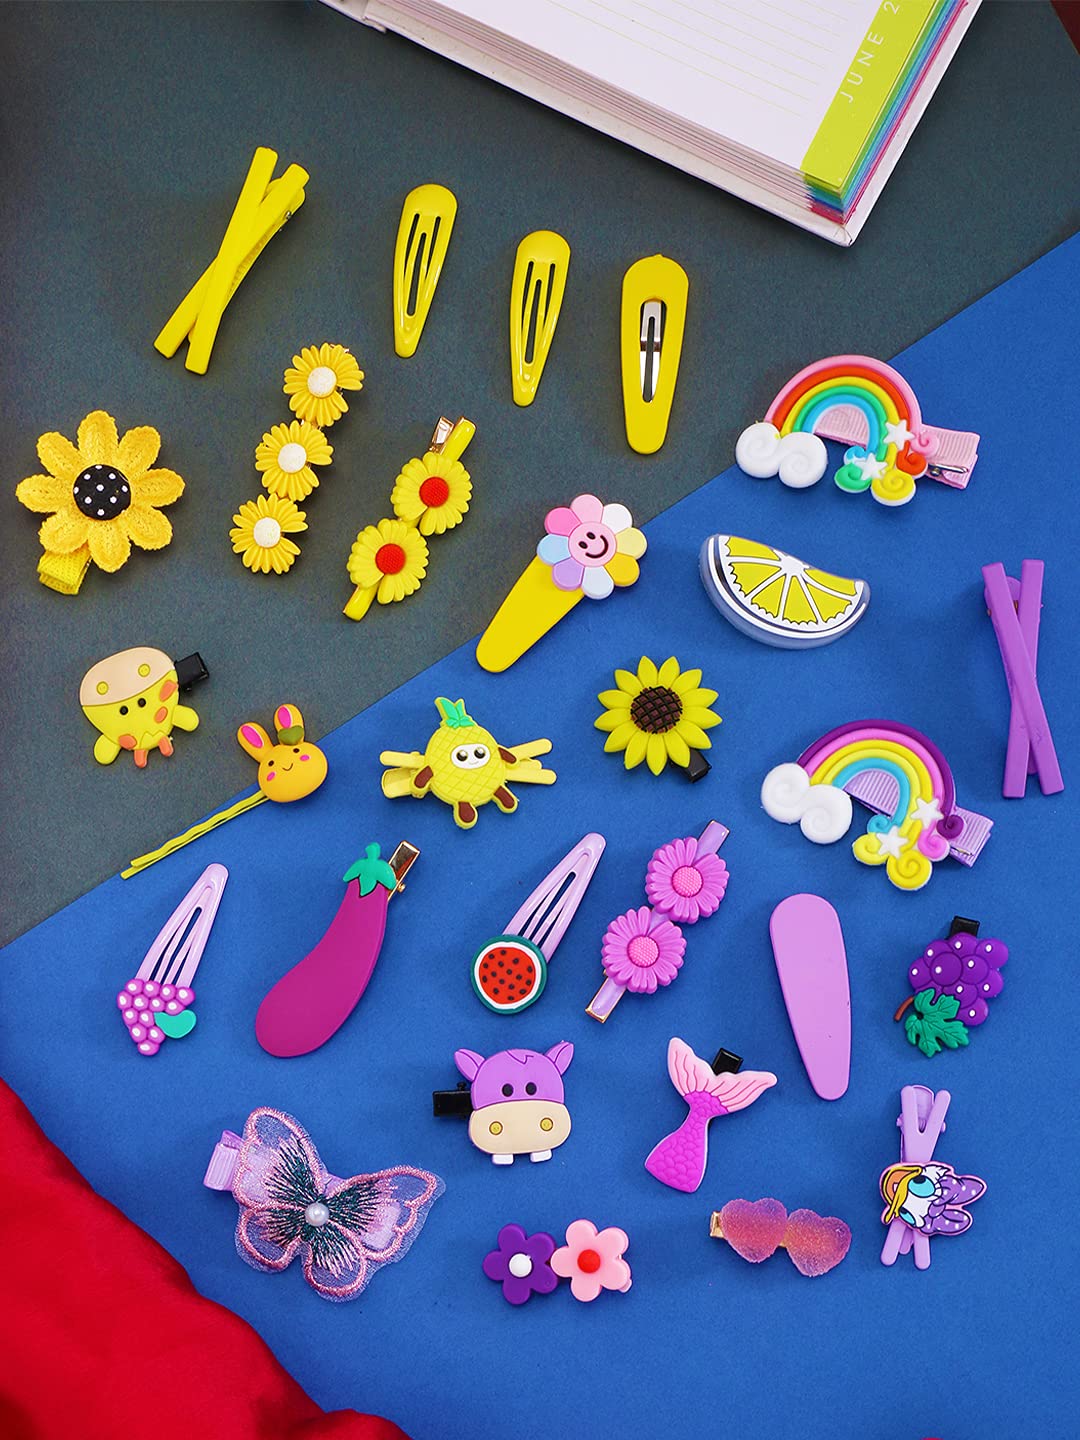 Yellow Chimes Hair Clips for Girls 28 Pcs Hairclips for Kids Cute Characters Pretty Snap Hairpins Hair Accessories for Small Girls Kids.